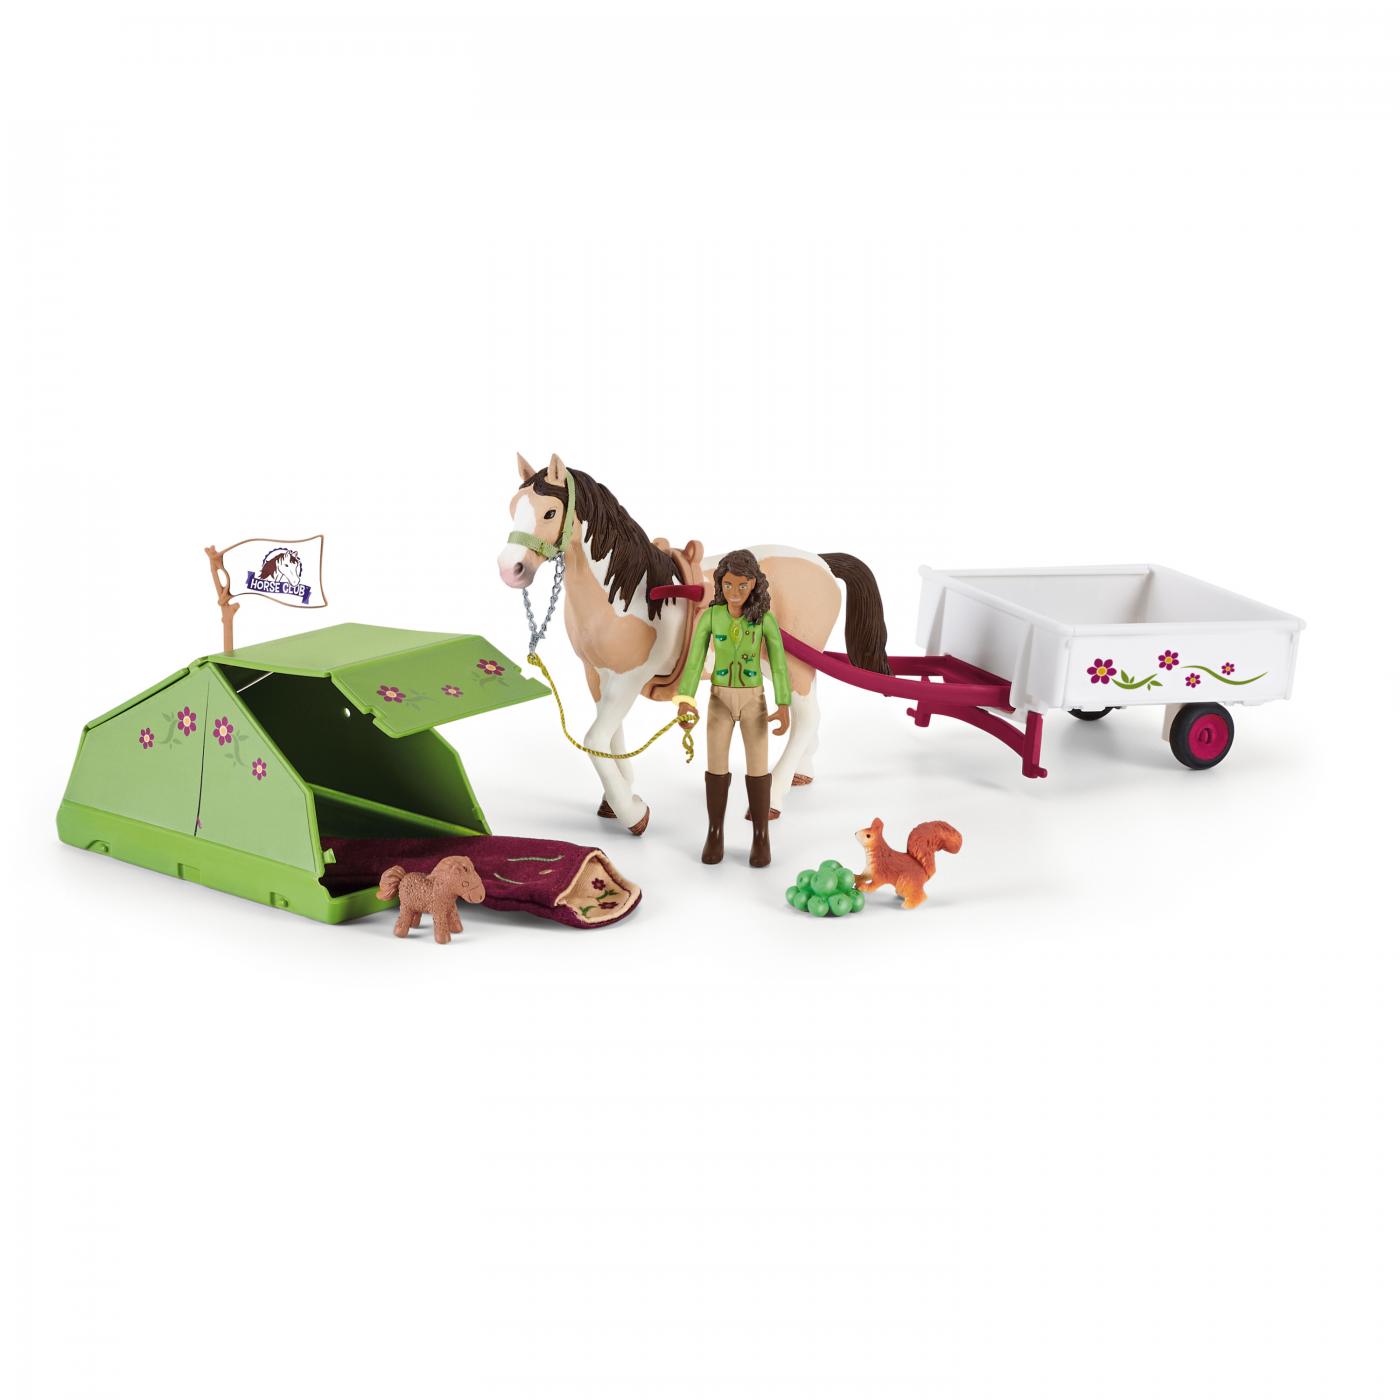 Schleich Horse Club Horses: Schleich Horse Club Sarah's camping trip 42533